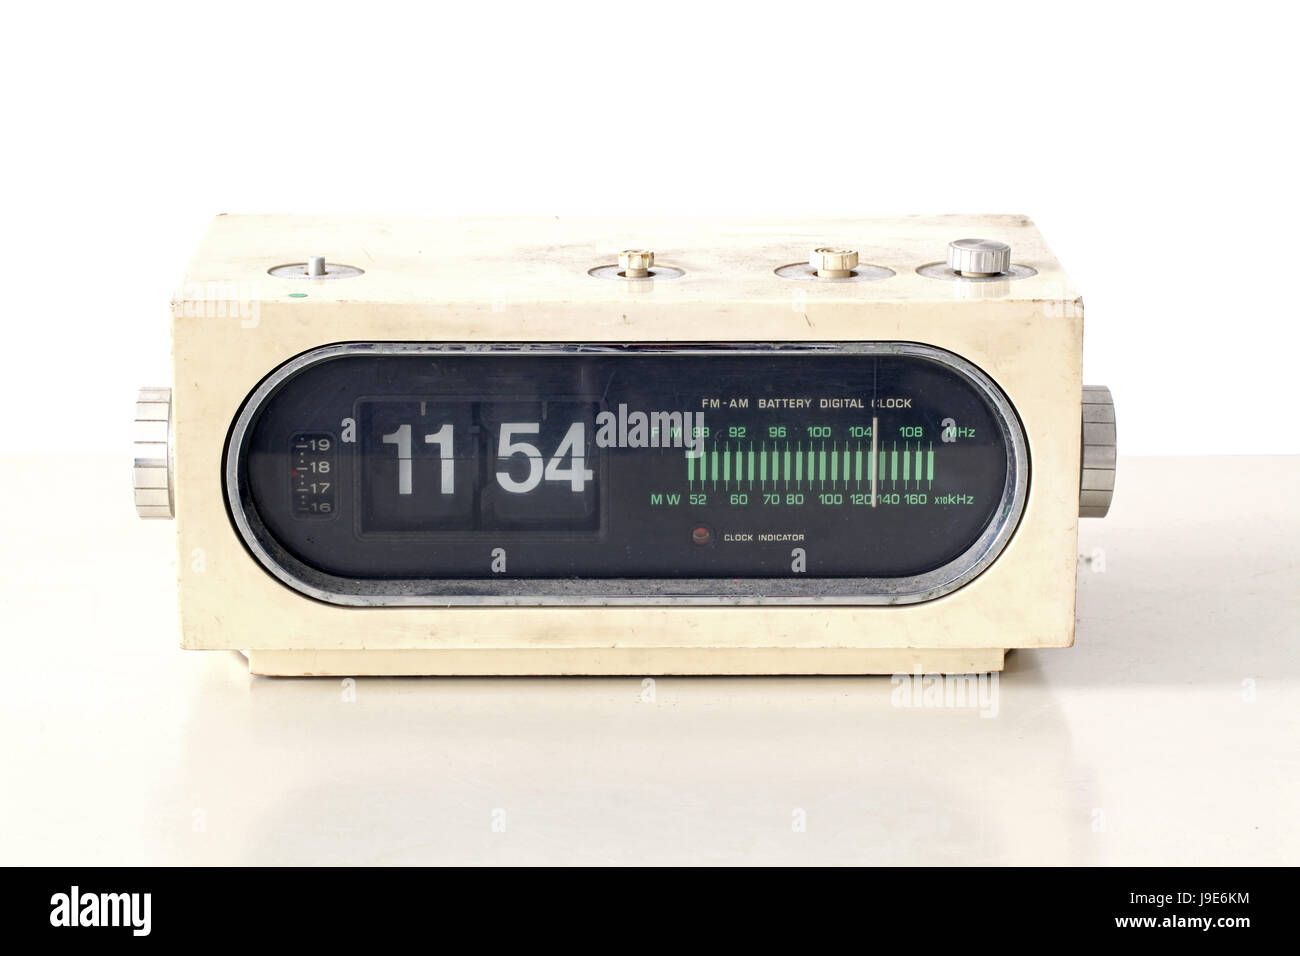 object, isolated, clock, date, time, time indication, vintage, radio, retro, Stock Photo